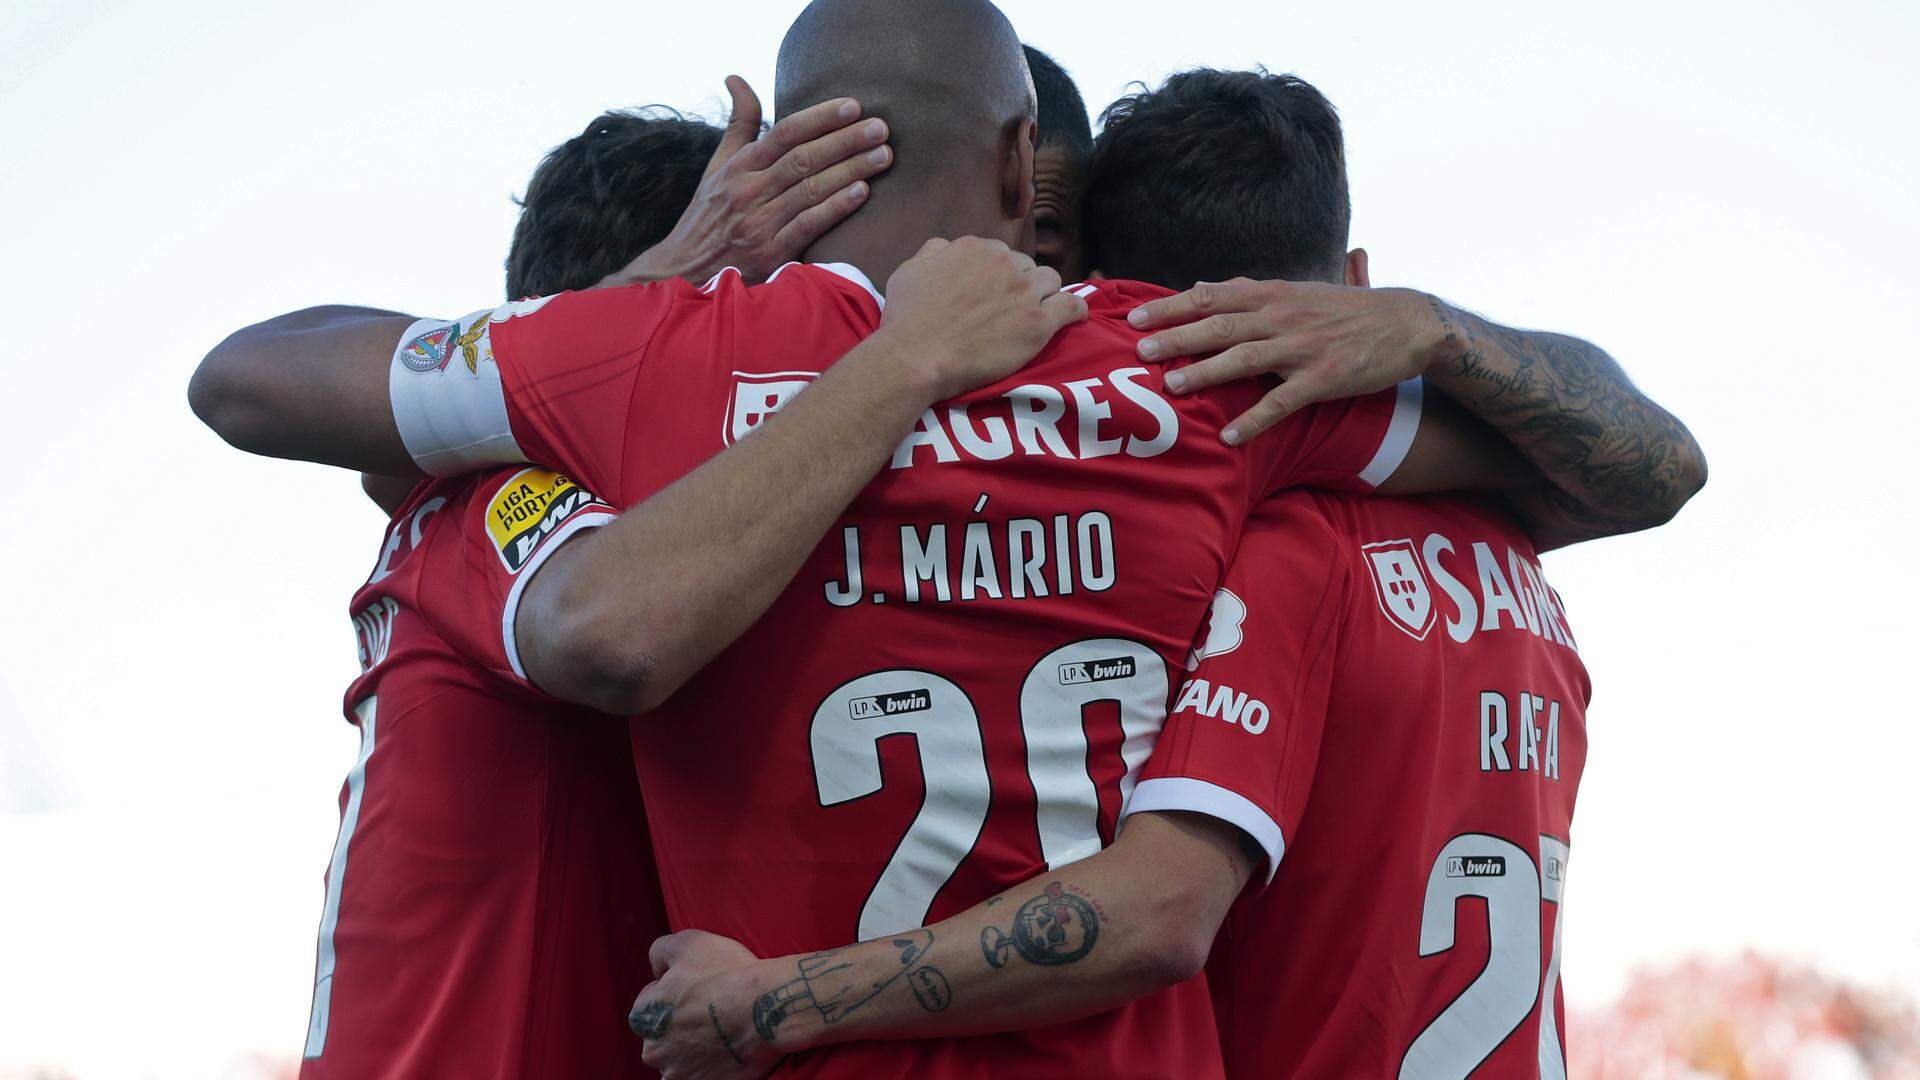 Benfica players celebrate a goal against Portimonense during their Portuguese First League soccer match held at Portimonense stadium, Portimao, Portugal, 13th May 2023. FILIPE FARINHA/LUSA